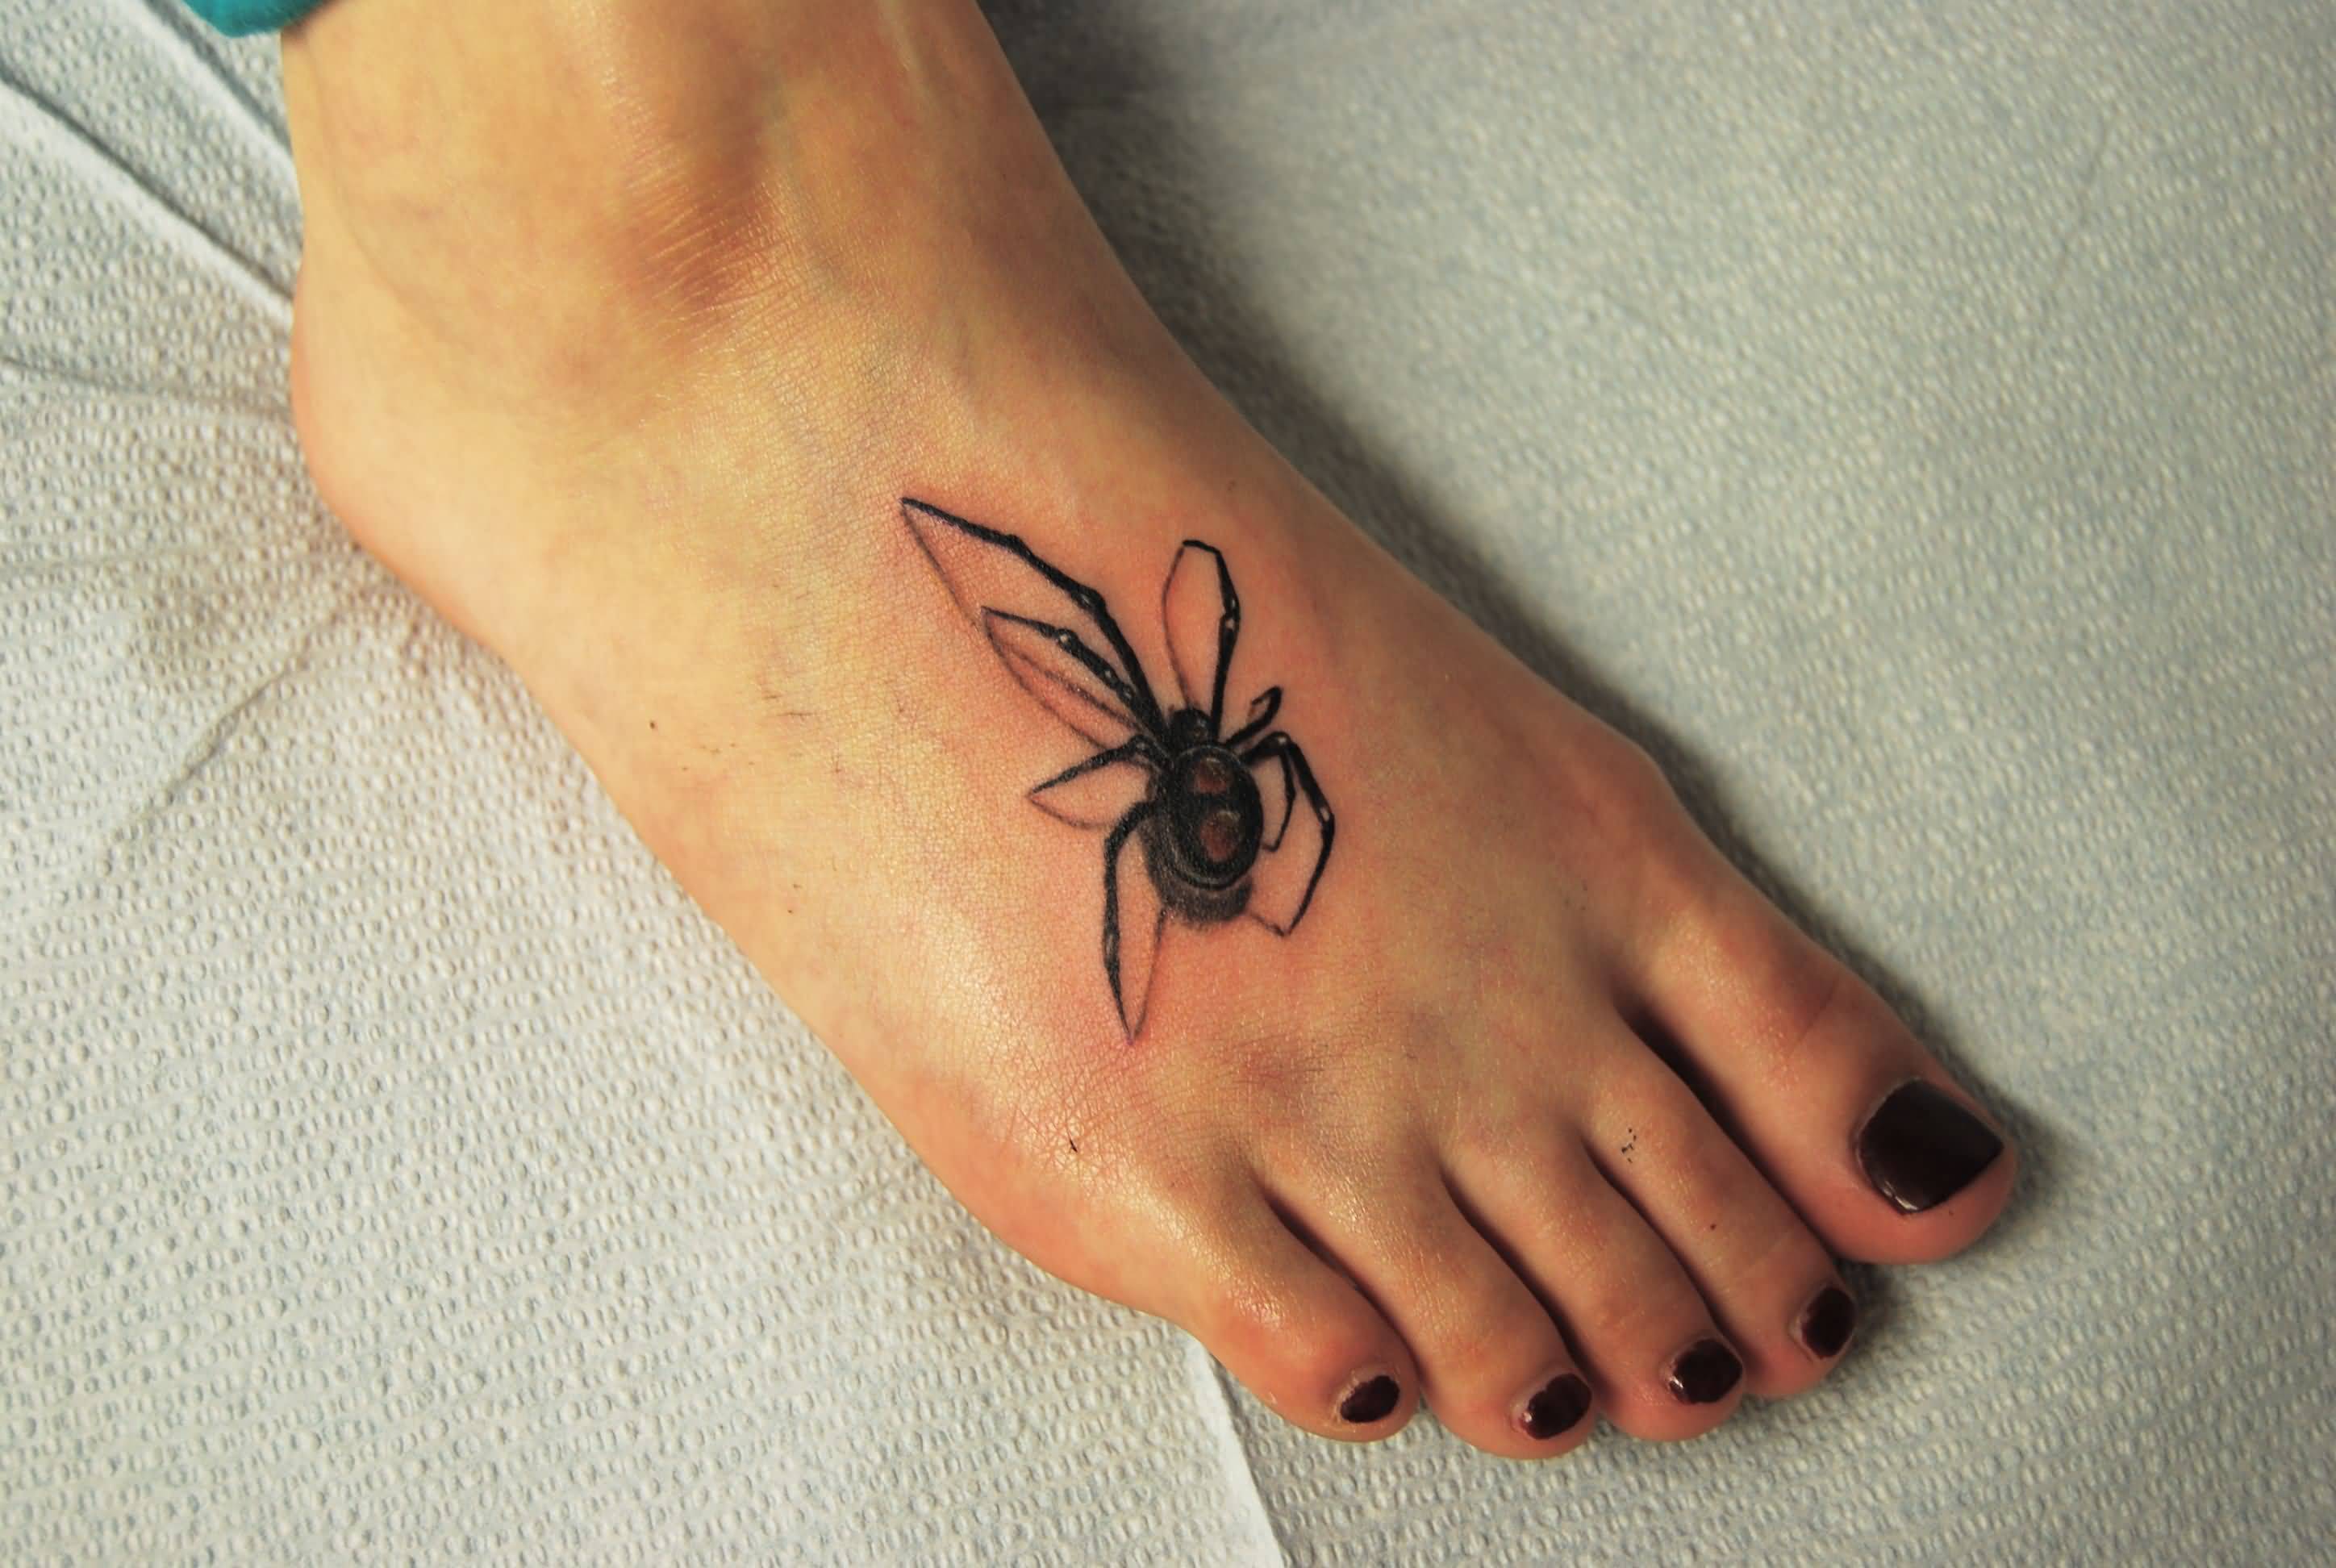 Awesome Spider Tattoo On Girl Right Foot